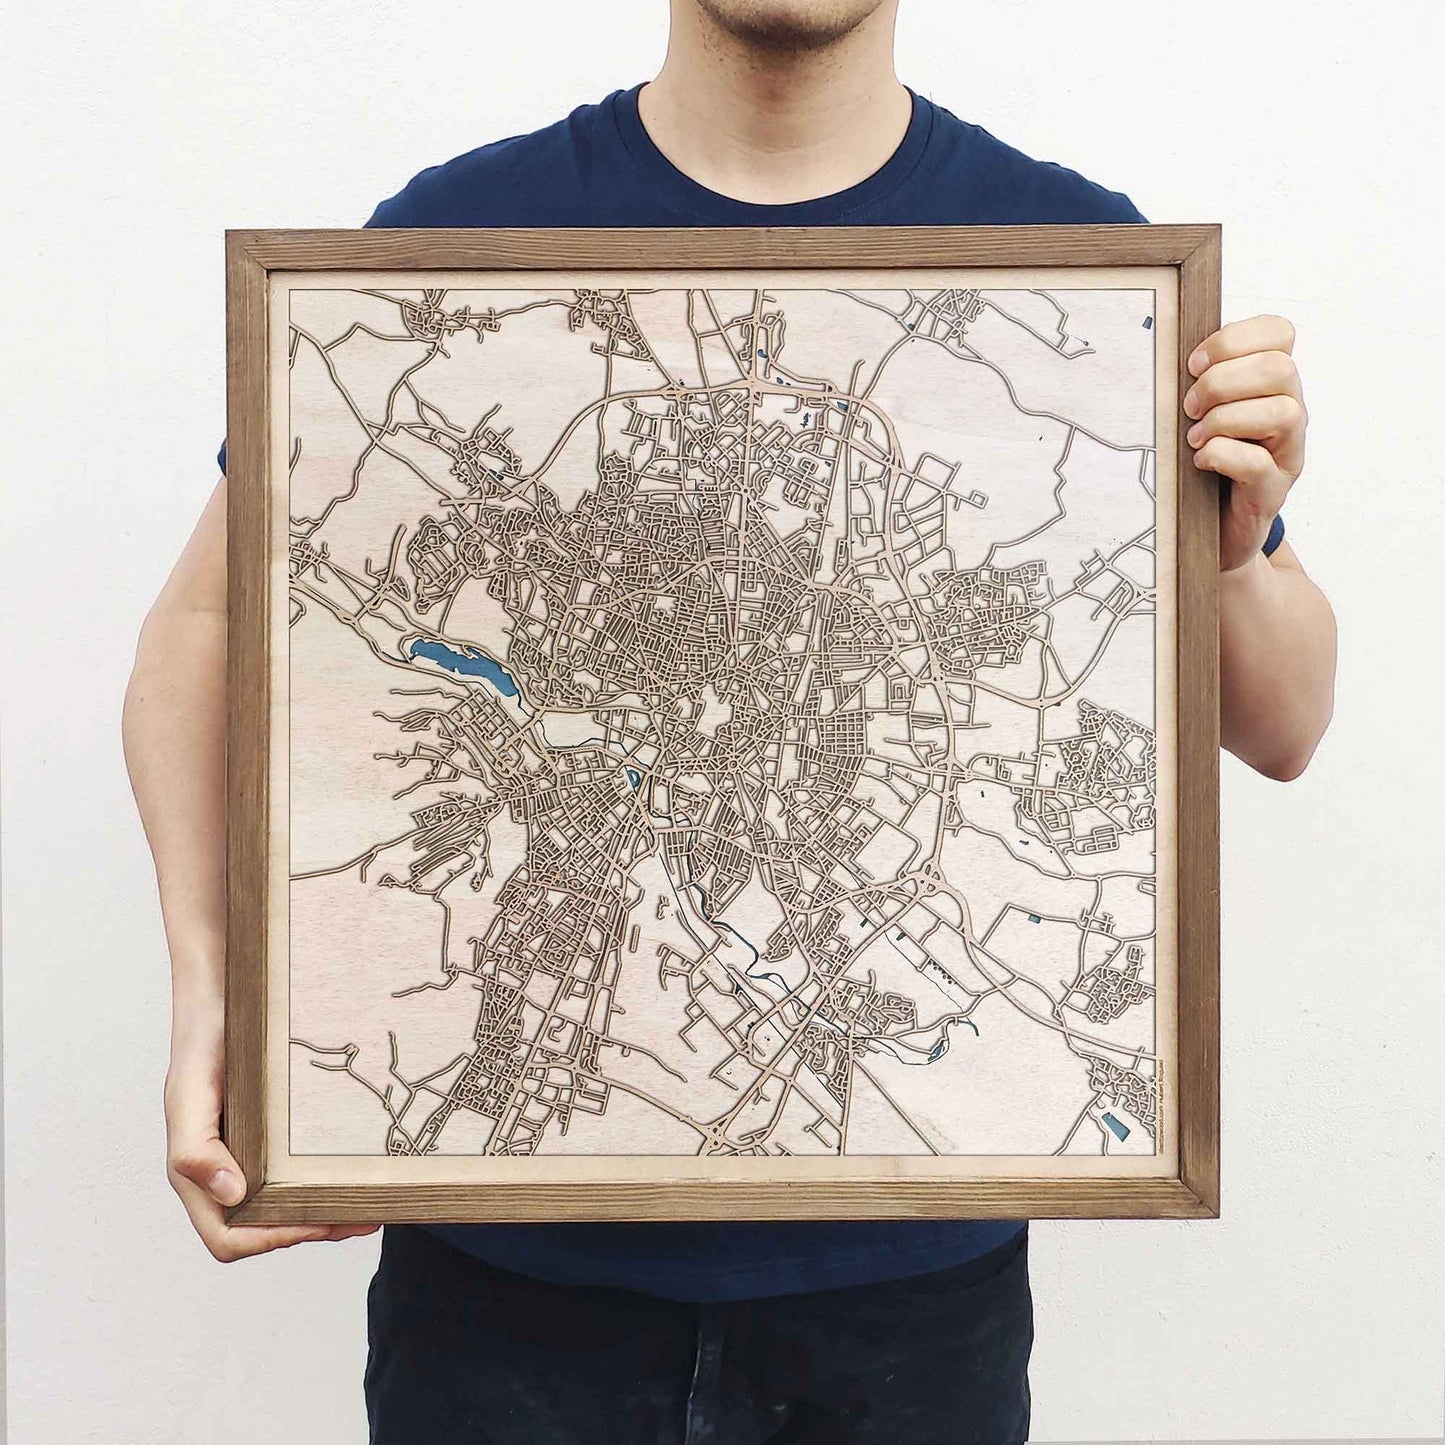 Dijon Wooden Map by CityWood - Custom Wood Map Art - Unique Laser Cut Engraved - Anniversary Gift